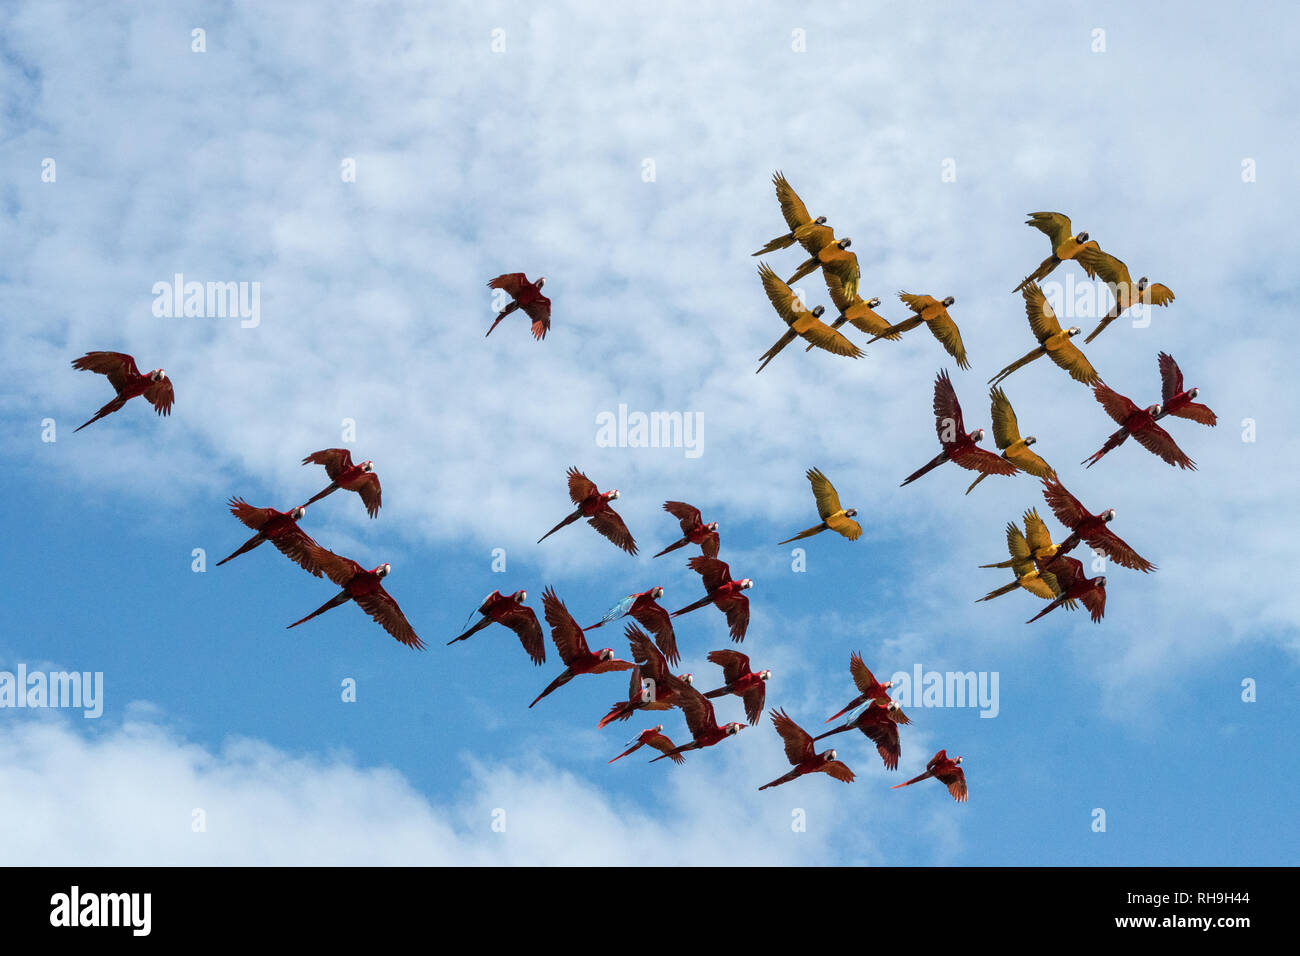 Page 2 - Schwarm Vögel High Resolution Stock Photography and Images - Alamy